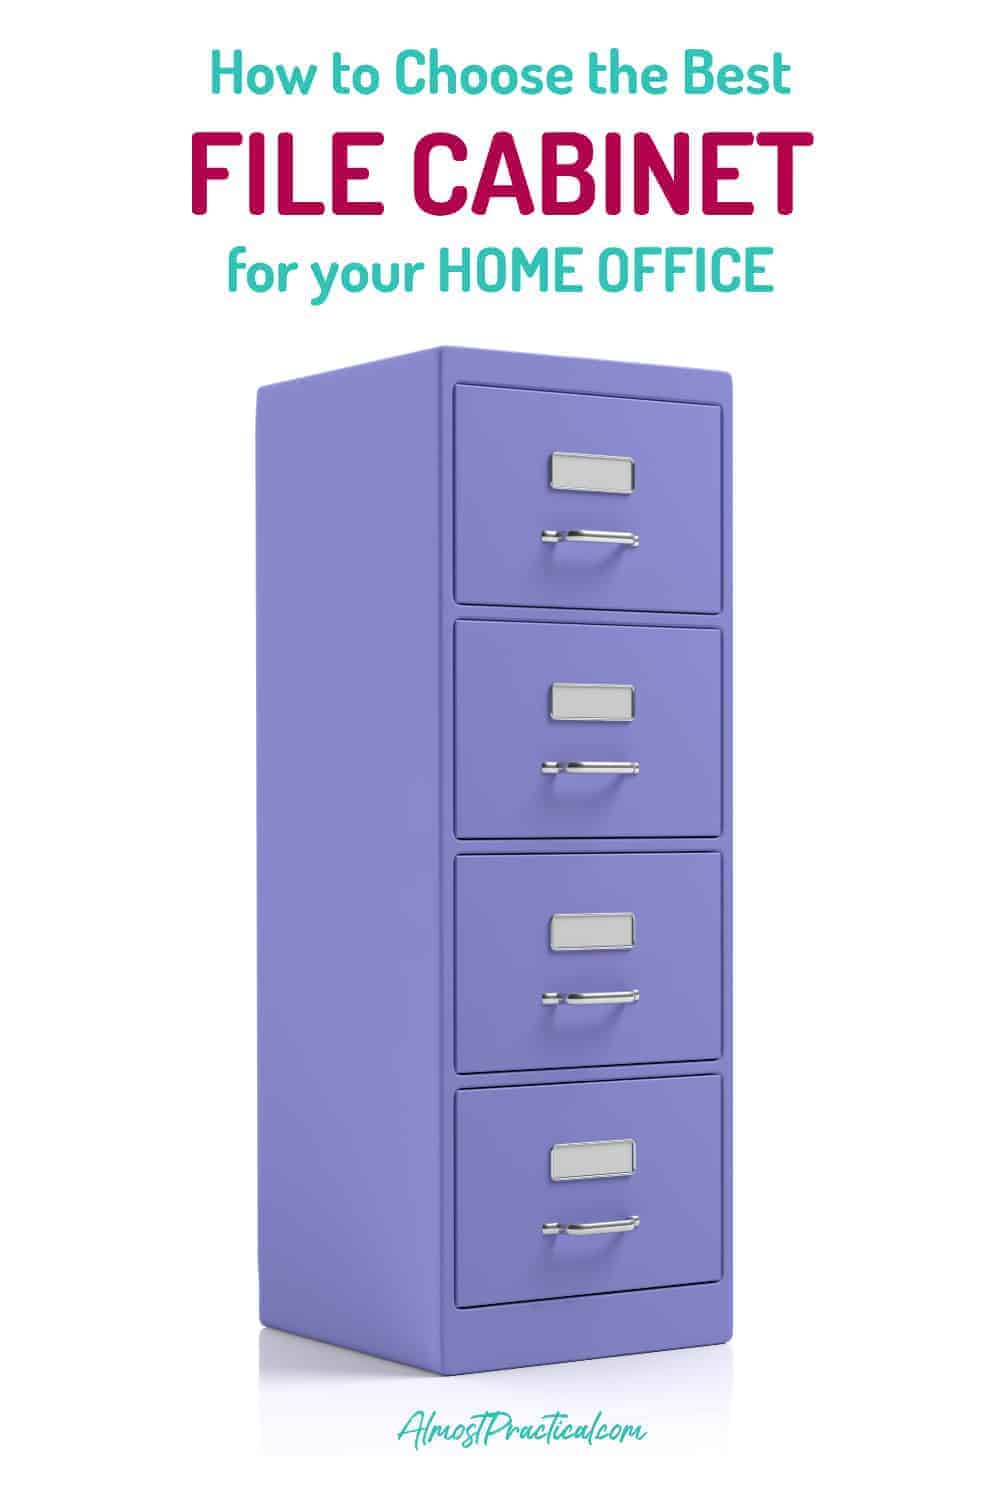 How To Choose The Best File Cabinet For Your Home Office